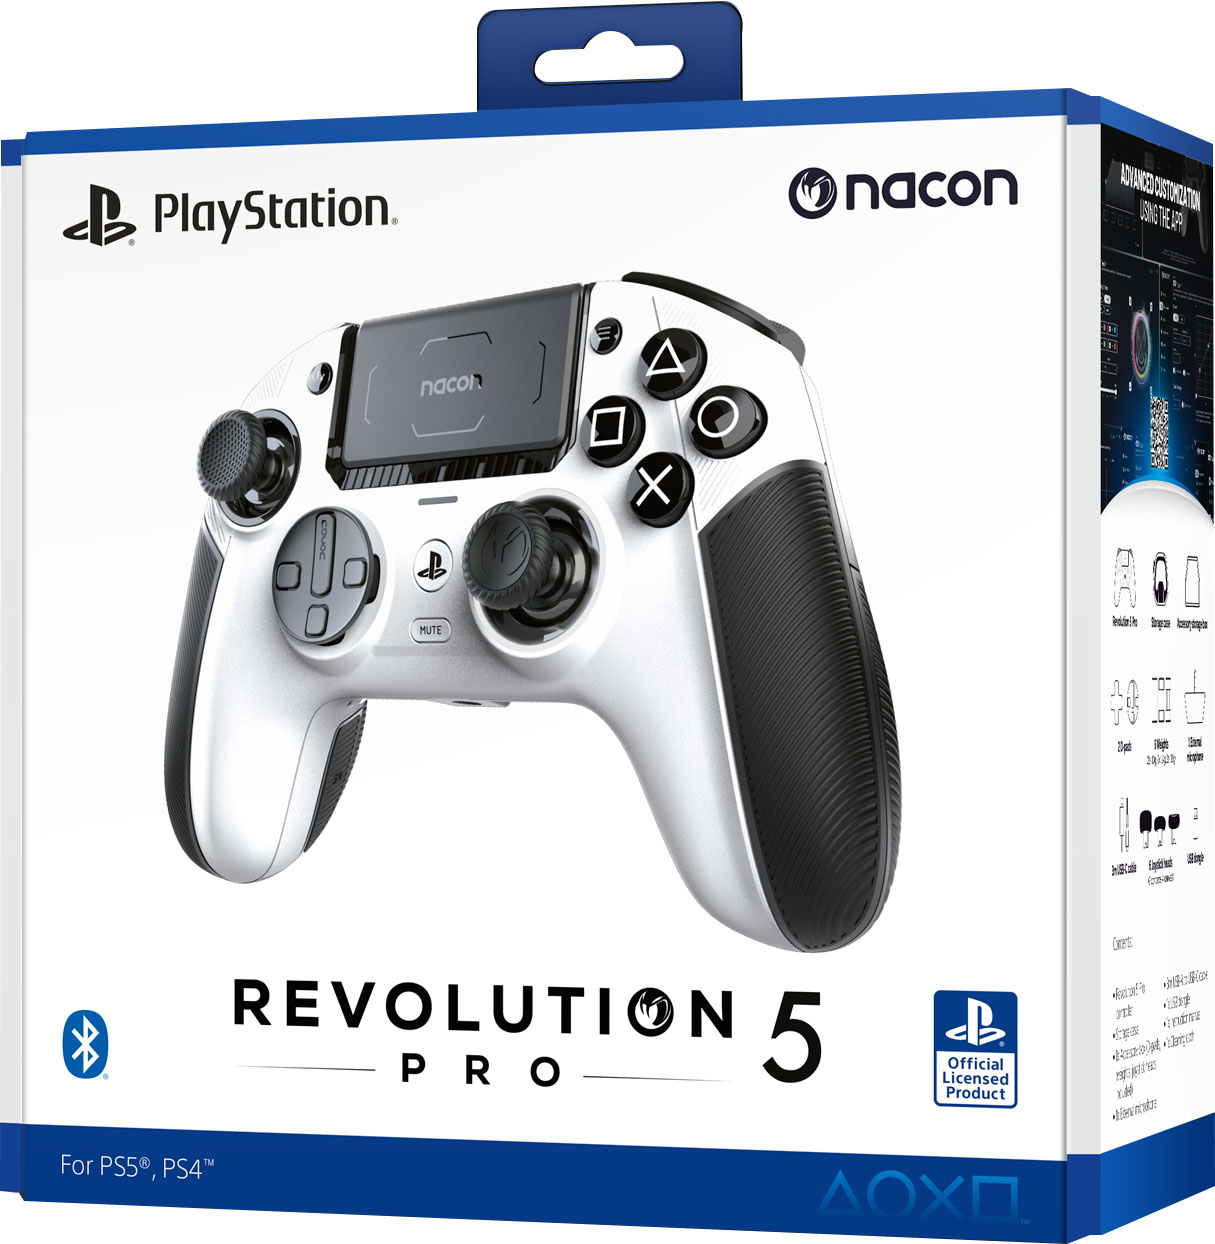 Nacon Revolution 5 Pro aims to be the ultimate controller for pro gamers -  - Gamereactor